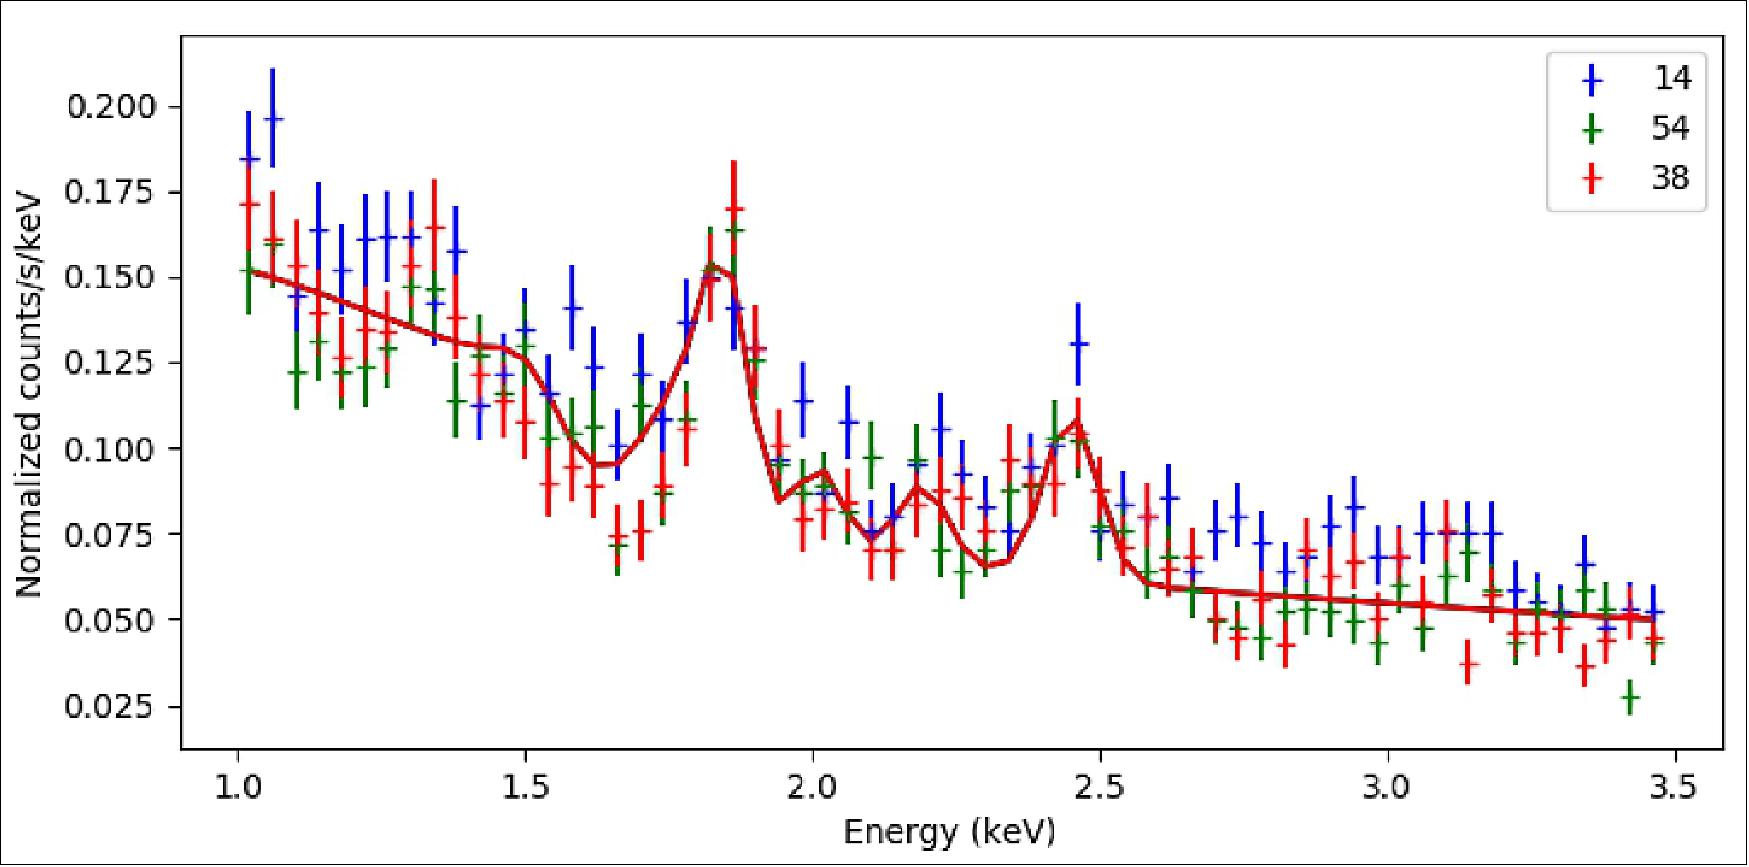 Figure 13: X-ray spectra of the Cassiopeia A field. Data from all three detectors are shown as indicated by the DPU number in the legend, 14=black, 54=red, 38=green. Prominent emission lines are visible from Si XIII at 1.86 keV and 2.18 keV, S XV at 2.45 keV, and S XIV at 2.01 keV. These spectra use the ground energy scale calibration with no temperature correction applied (image credit: HaloSat Team)